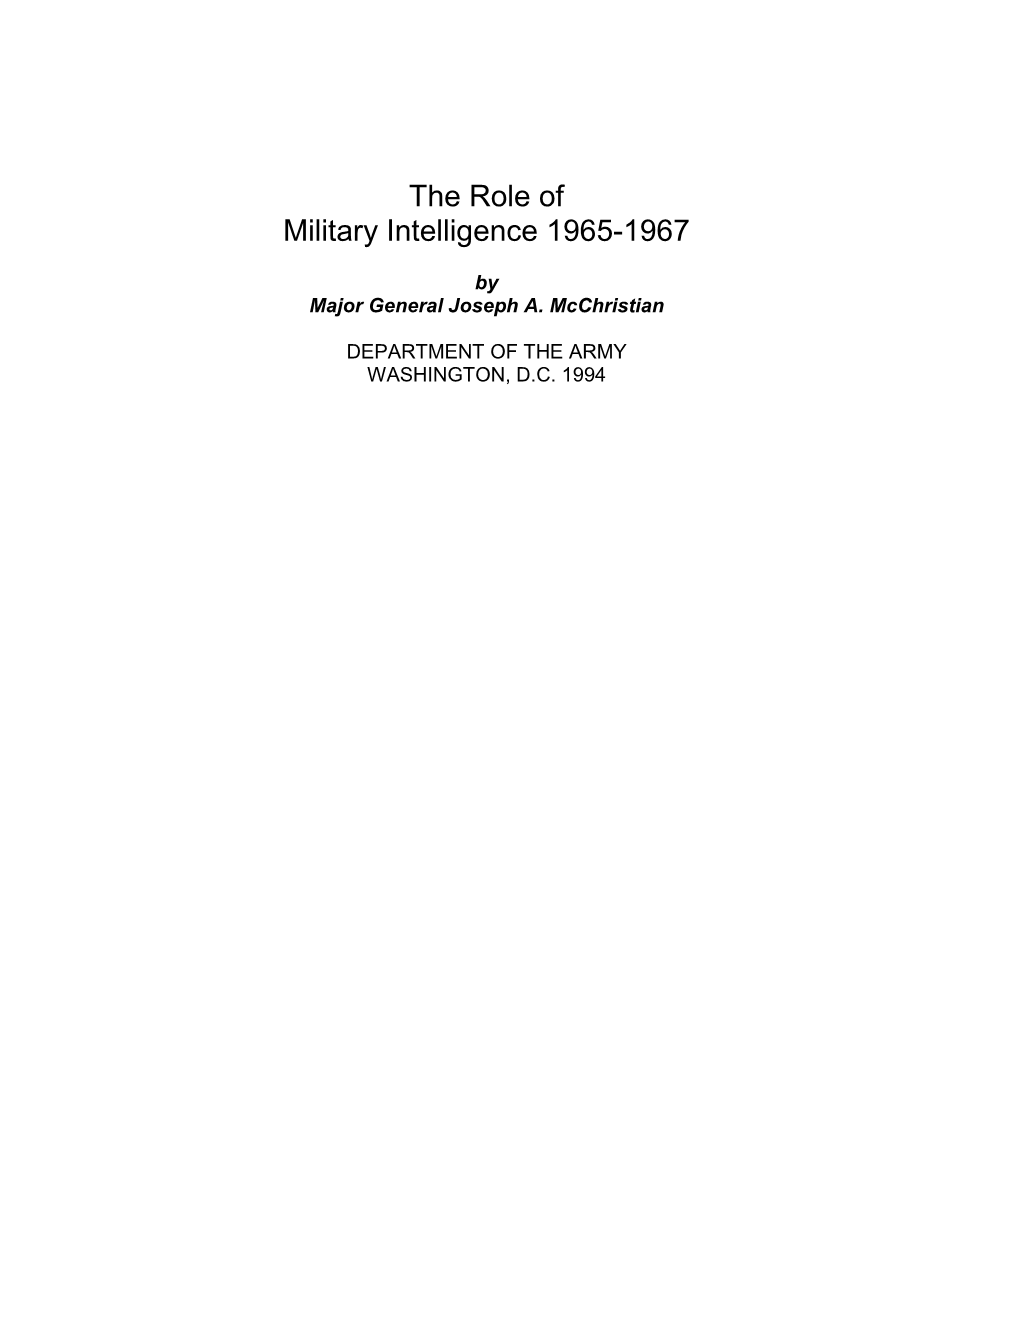 The Role of Military Intelligence in Vietnam 1965-1967